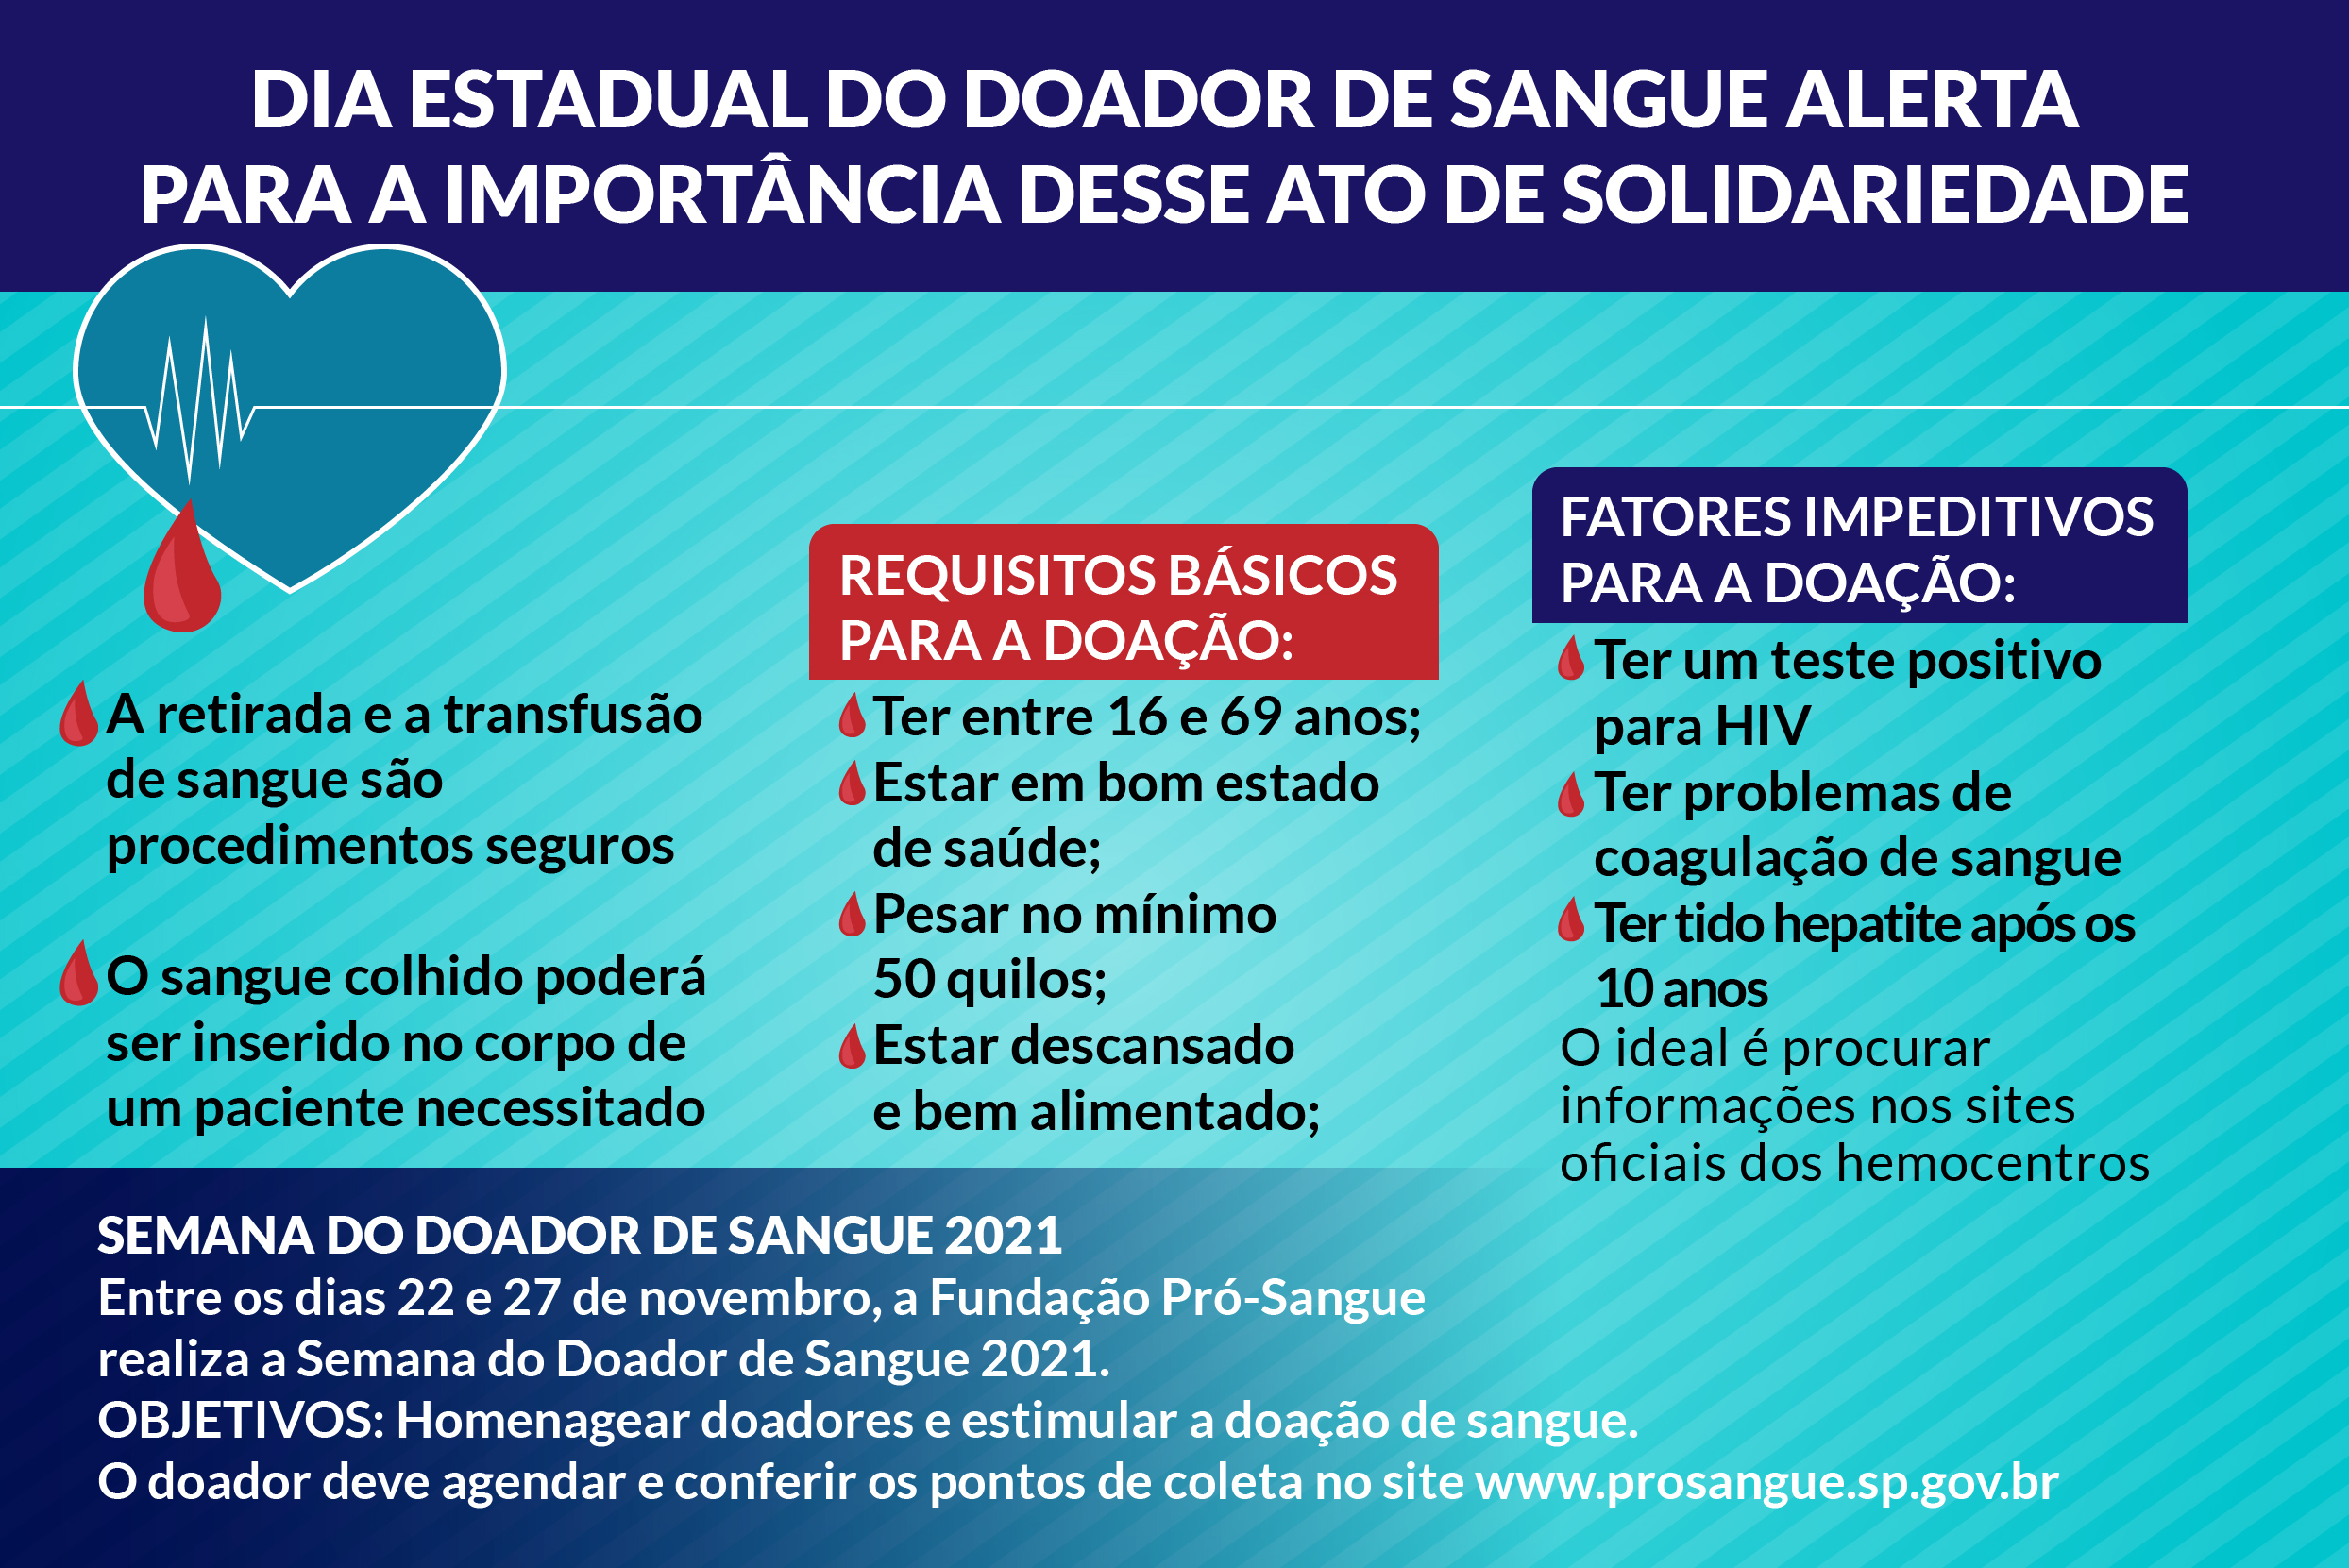 Infográfico <a style='float:right' href='https://www3.al.sp.gov.br/repositorio/noticia/N-11-2021/fg278955.jpg' target=_blank><img src='/_img/material-file-download-white.png' width='14px' alt='Clique para baixar a imagem'></a>